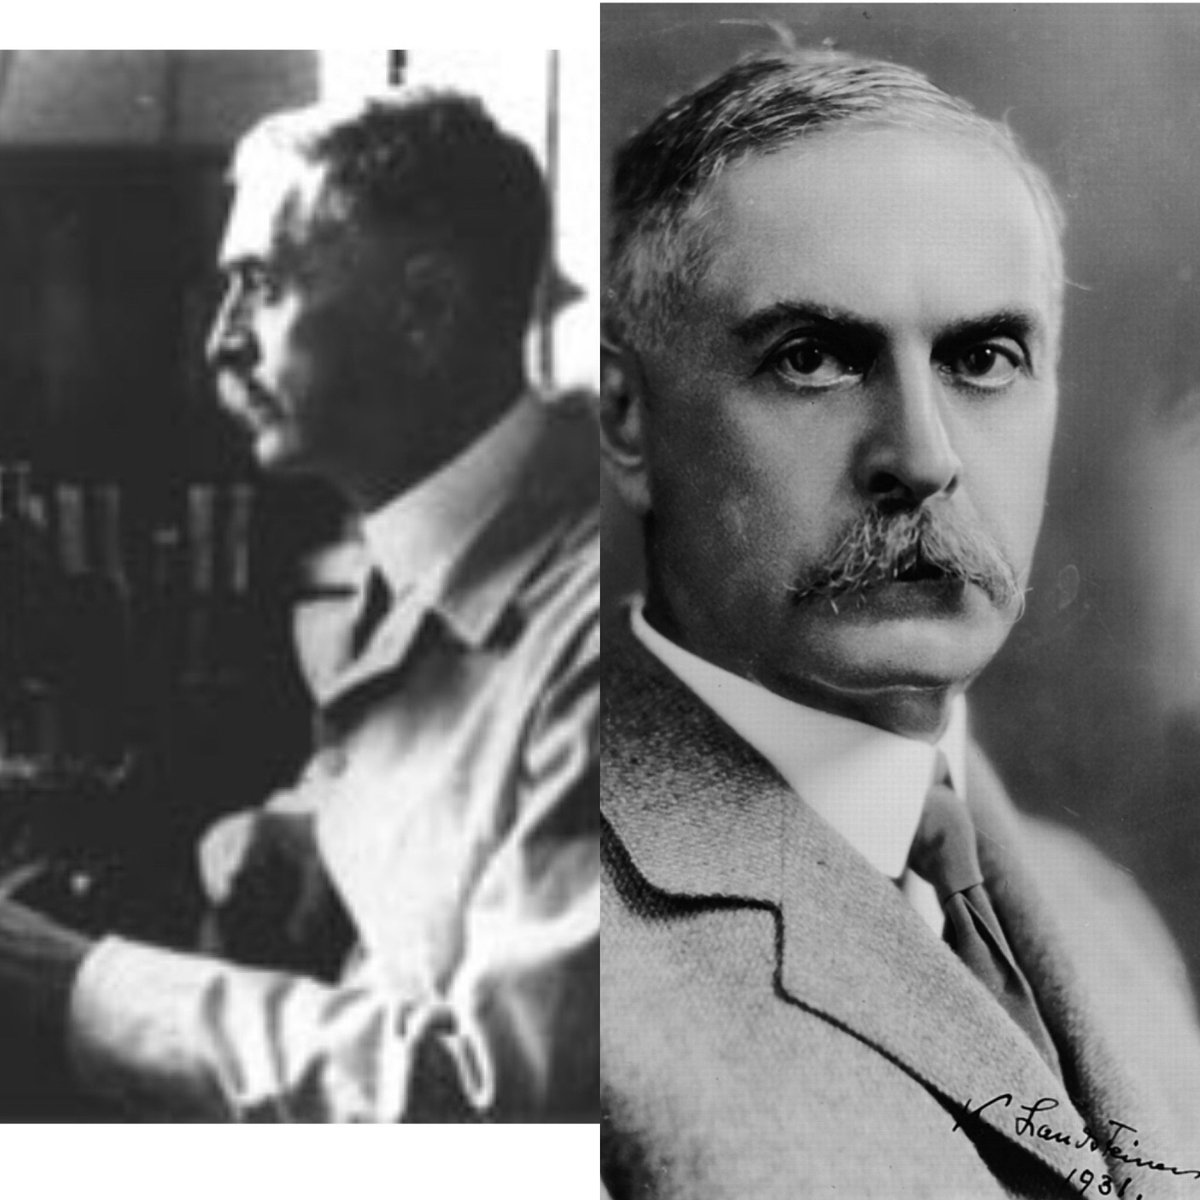 Paroxysmal cold hemoglobinuria (PCH) was first described clinically in 1872! These two chaps (Donath and Landsteiner) discovered the antibody (which would later be named for them) in 1904. 5/n